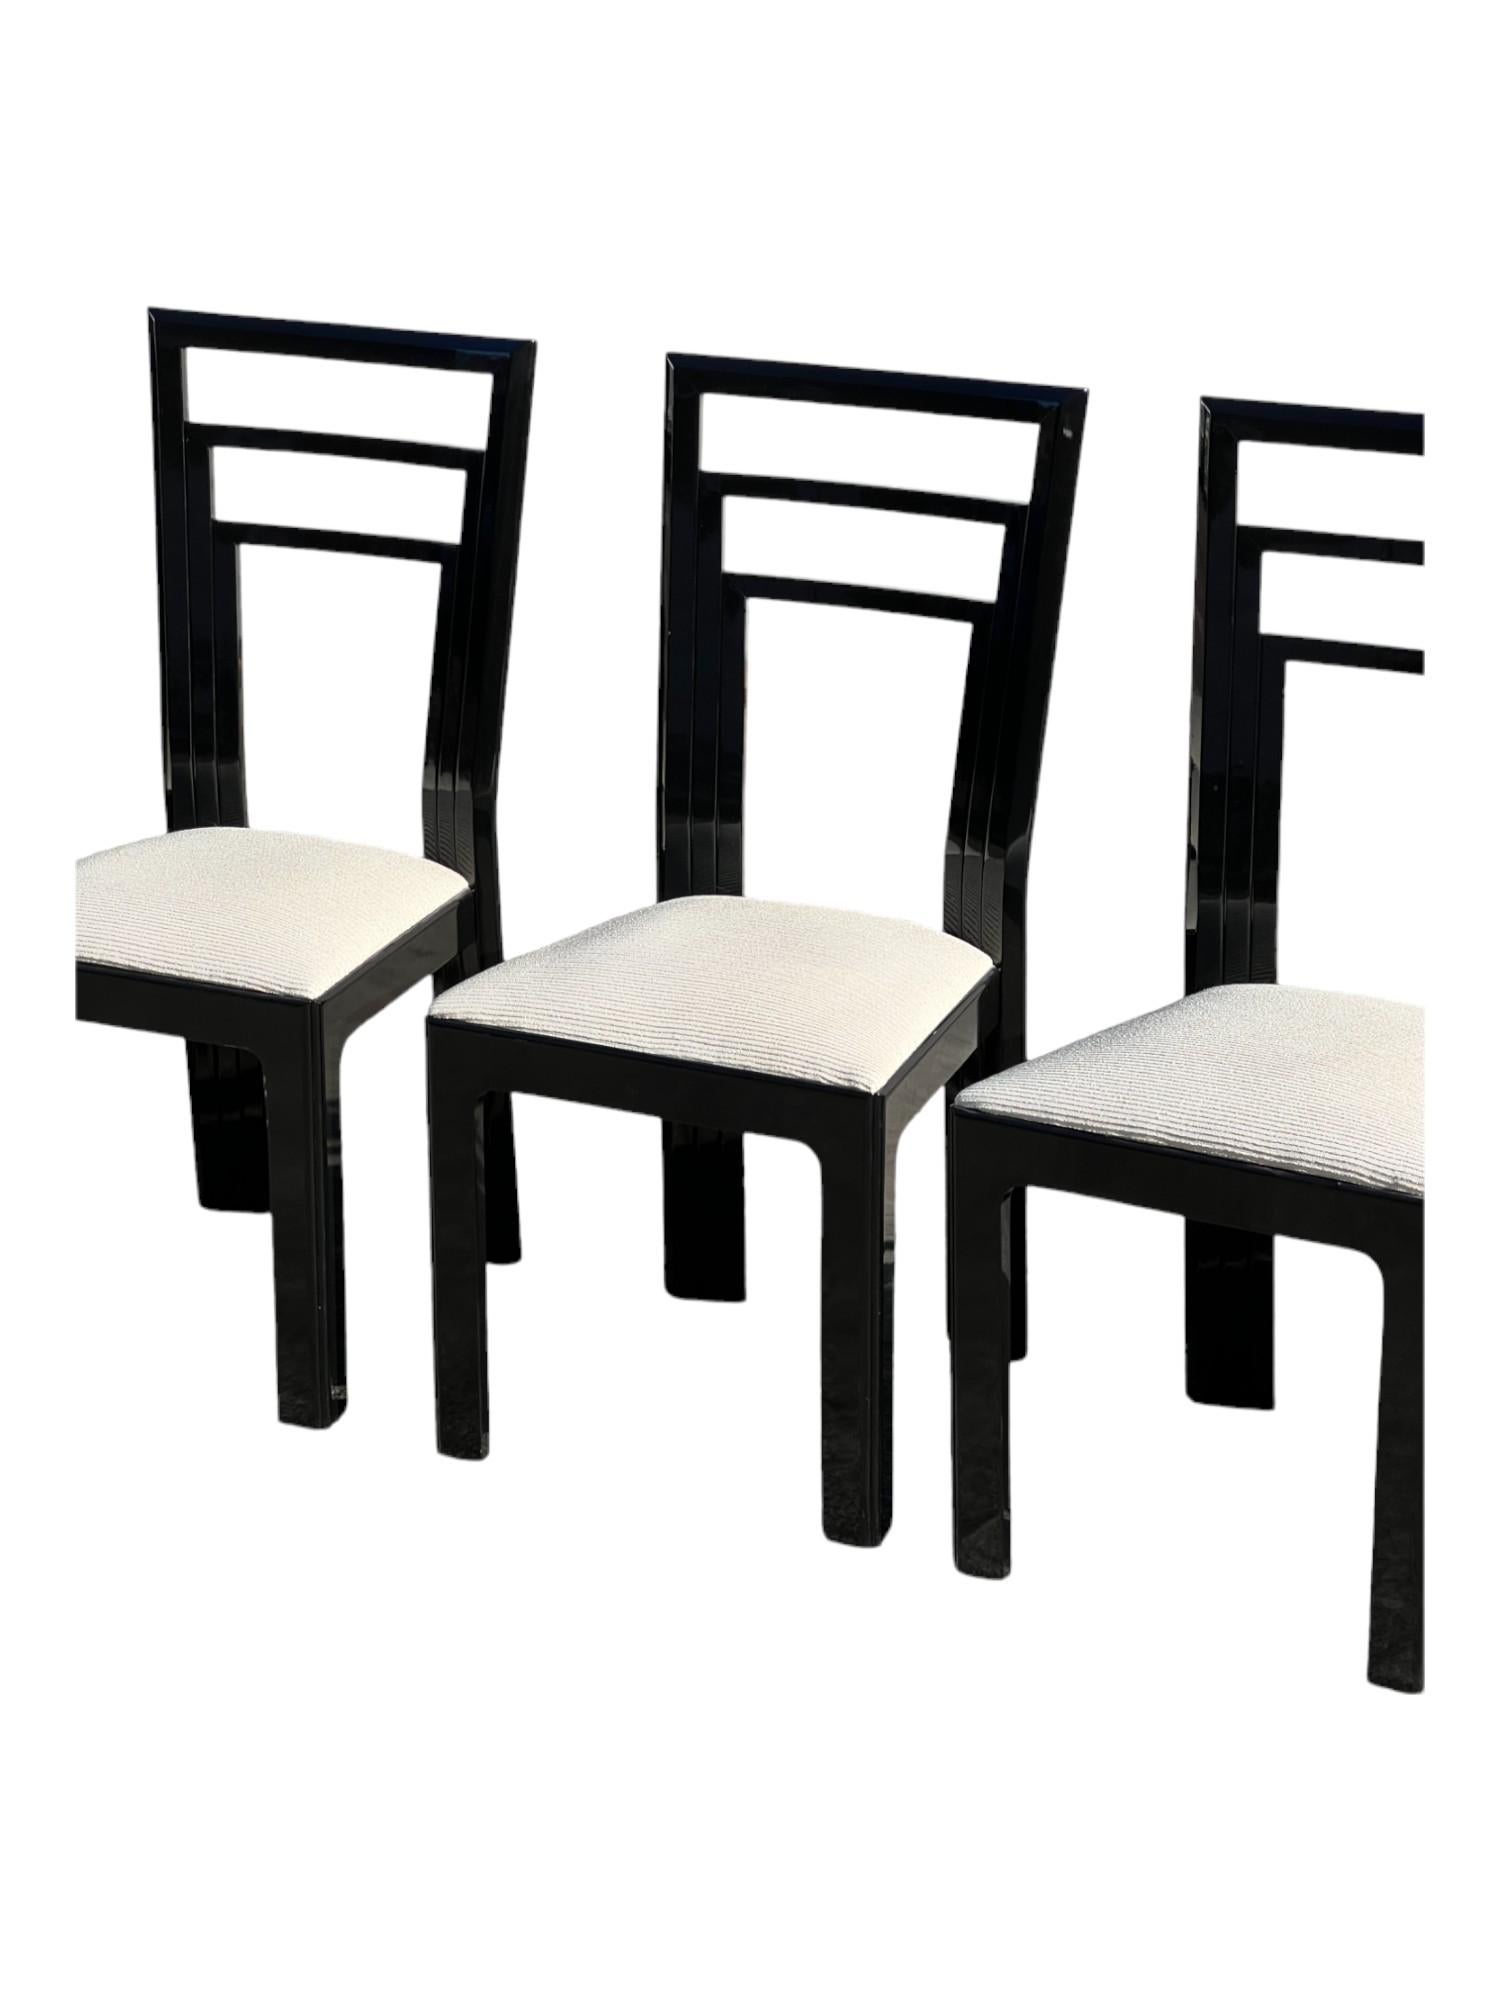 1980s Italian Black Lacquered Dining Chairs In Good Condition For Sale In South San Francisco, CA